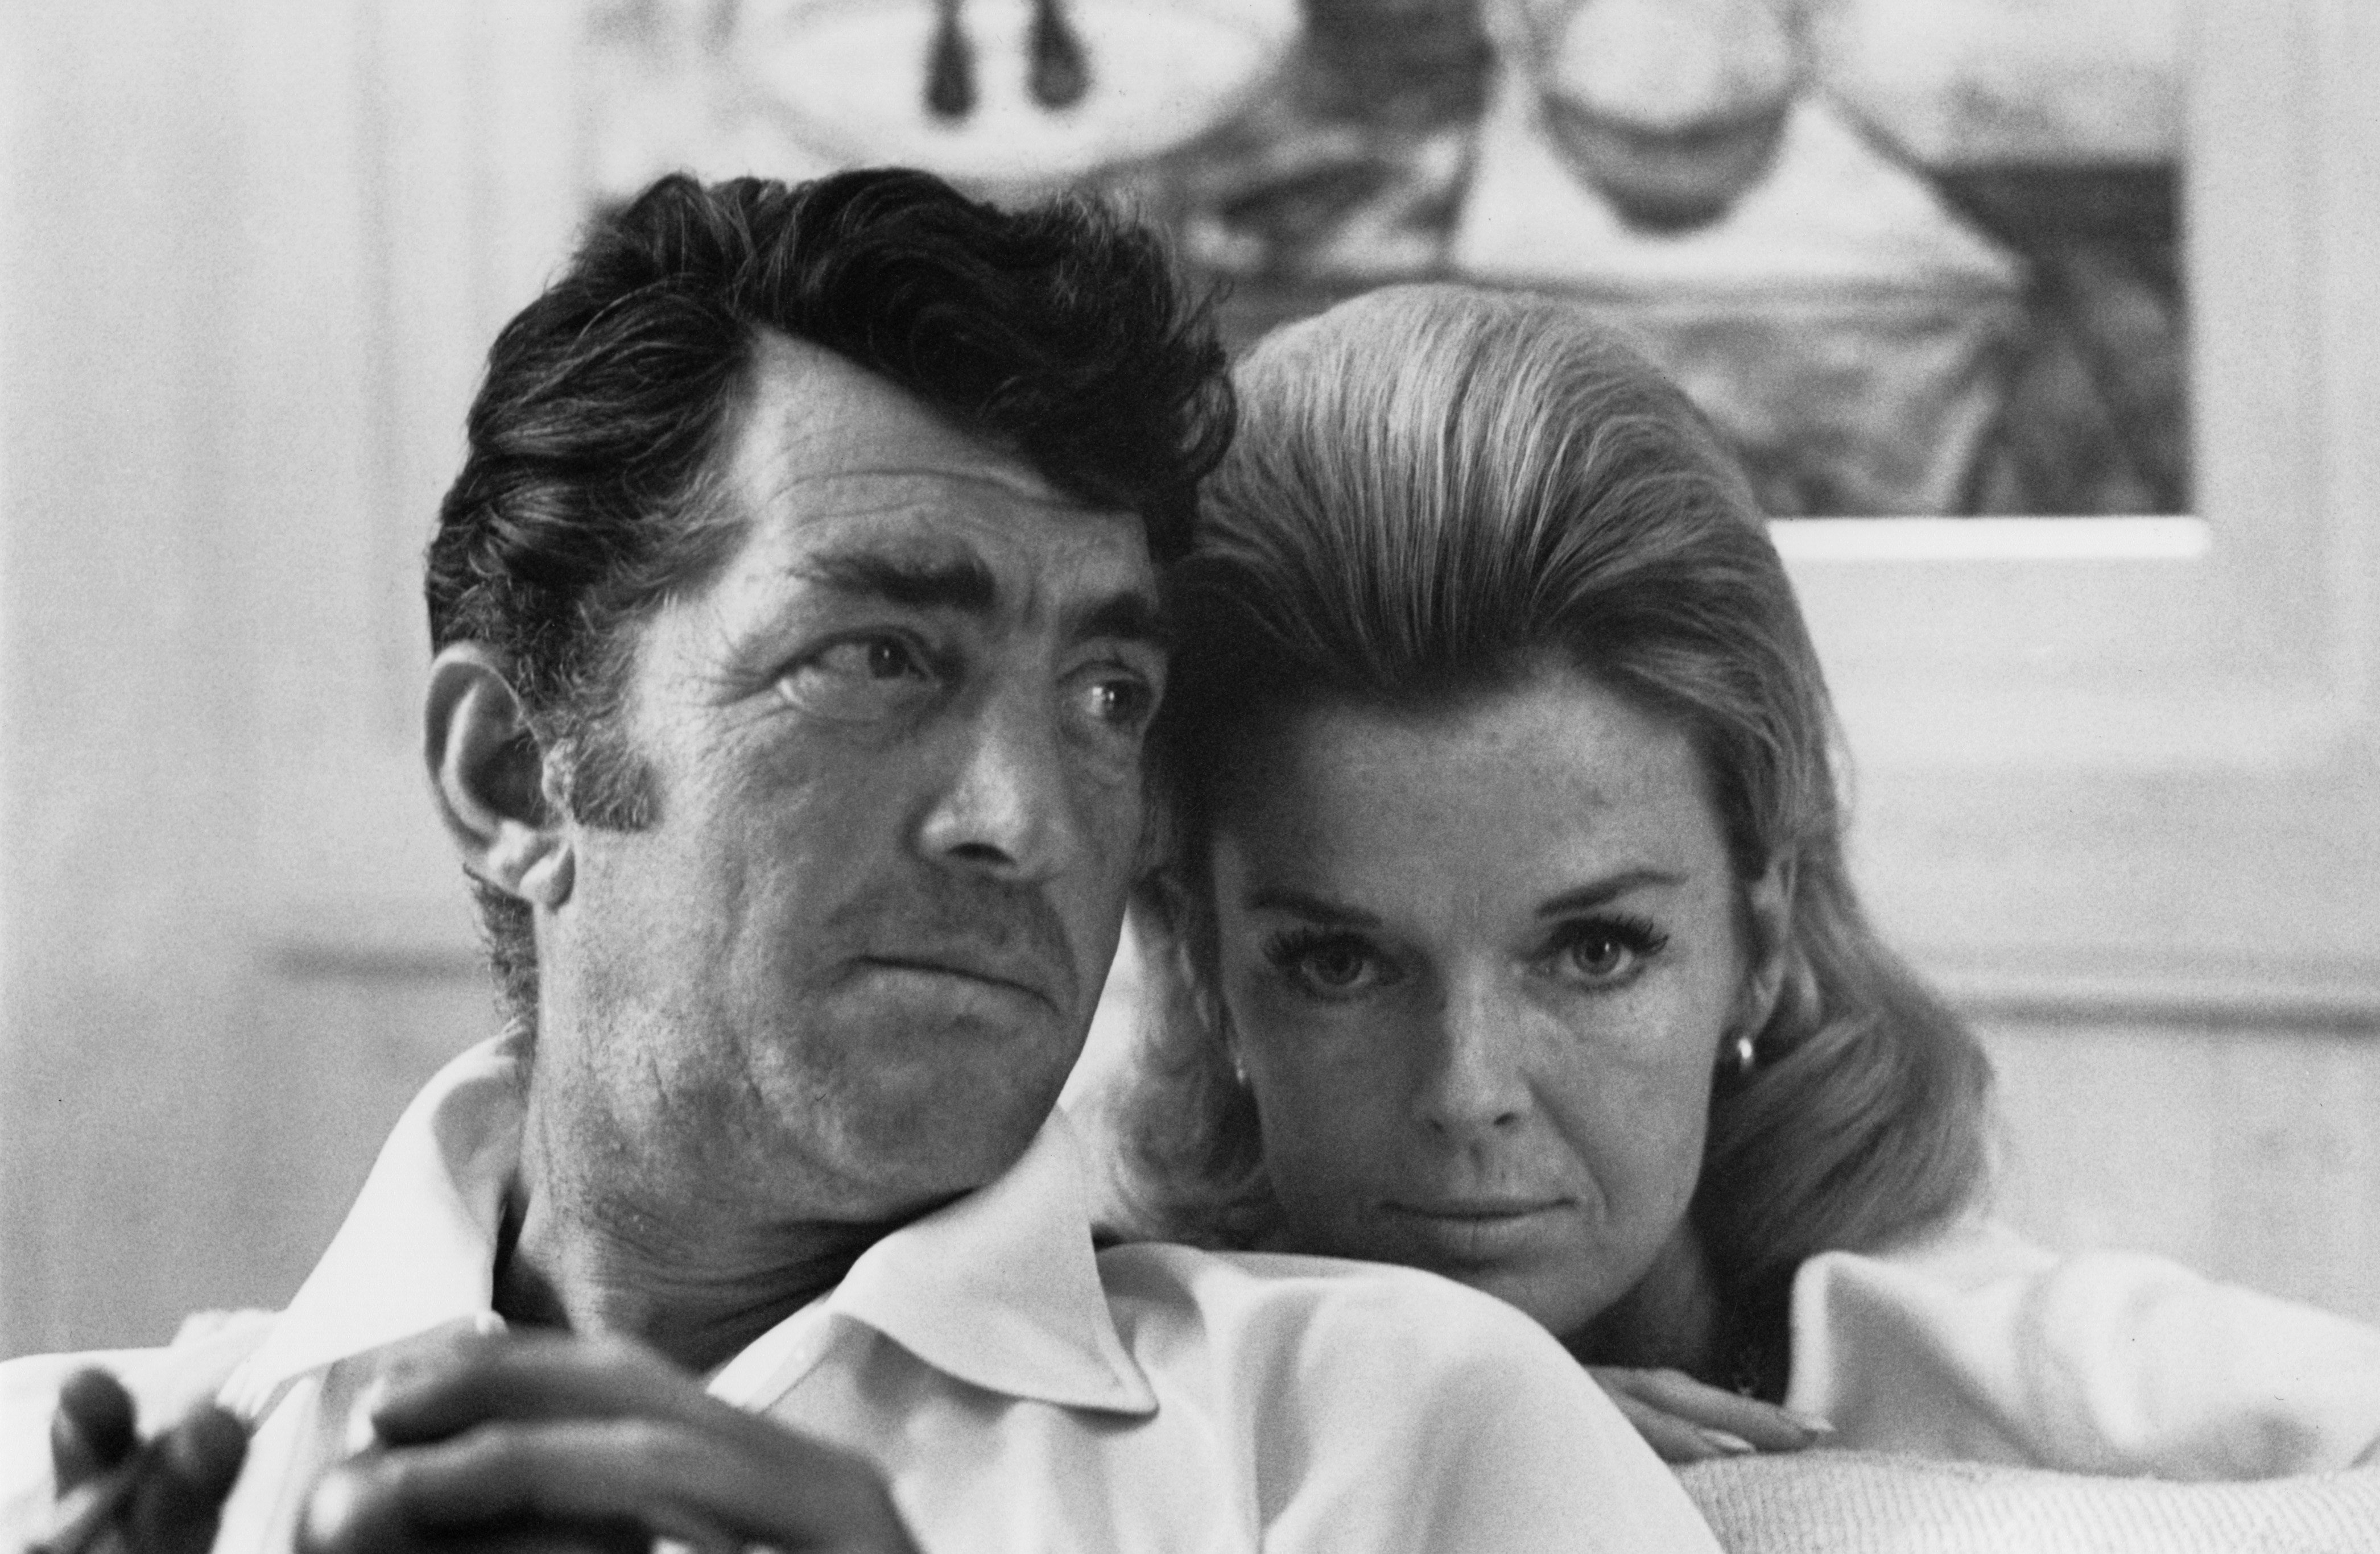 Dean Martin with his ex-wife, Jeanne, posing for a portrait in 1966 in Los Angeles, California. | Source: Getty Images